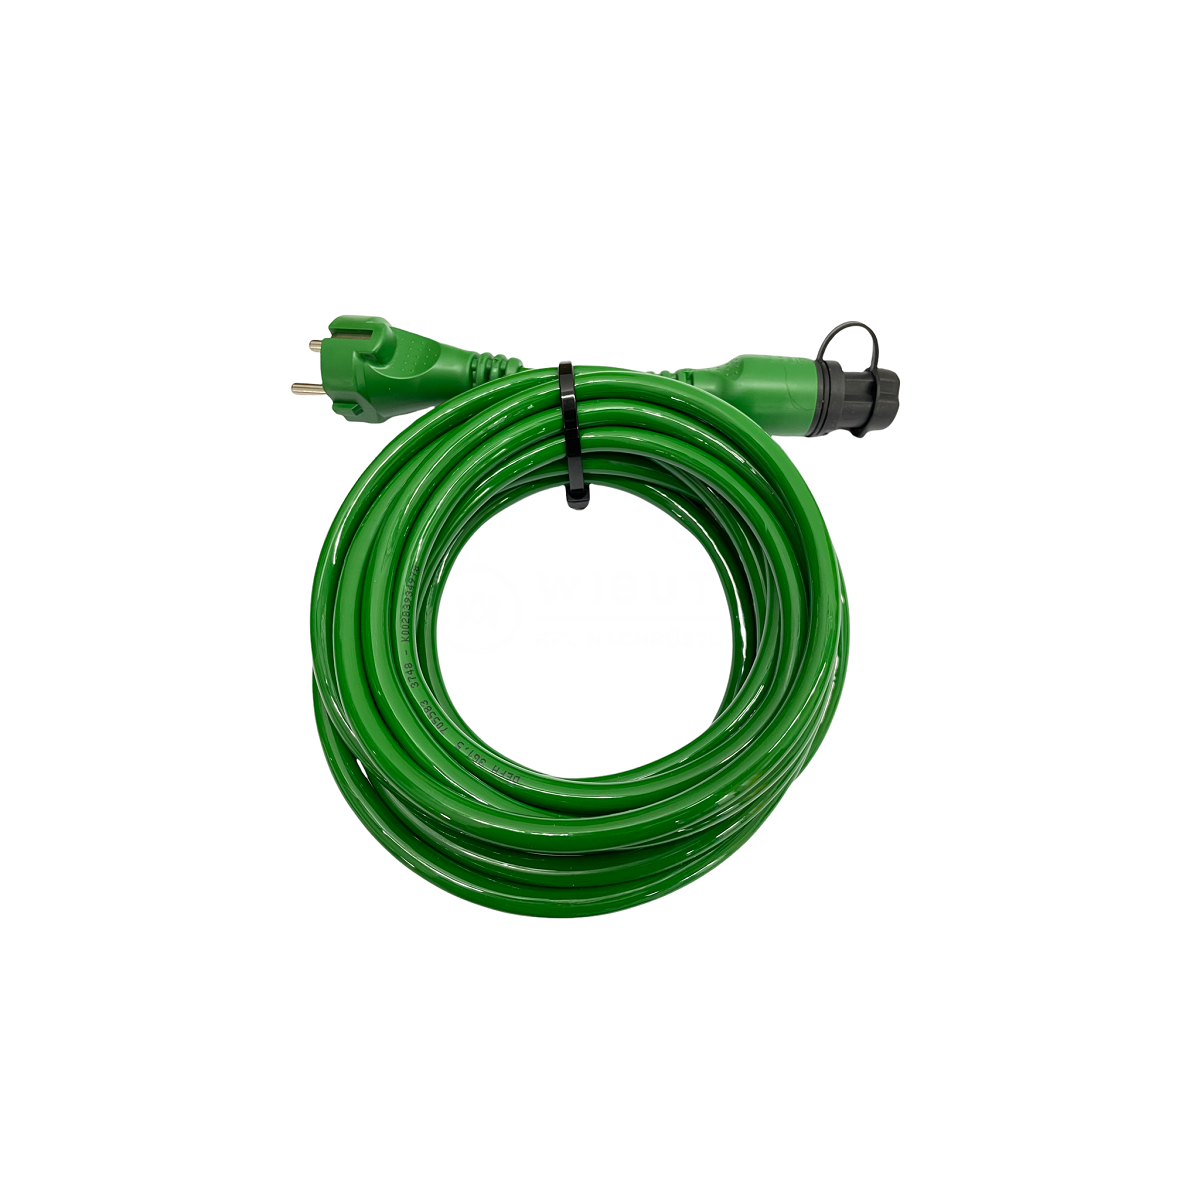 DEFA MiniPlug connection cable Green Link, 5 meters, 69,00 €